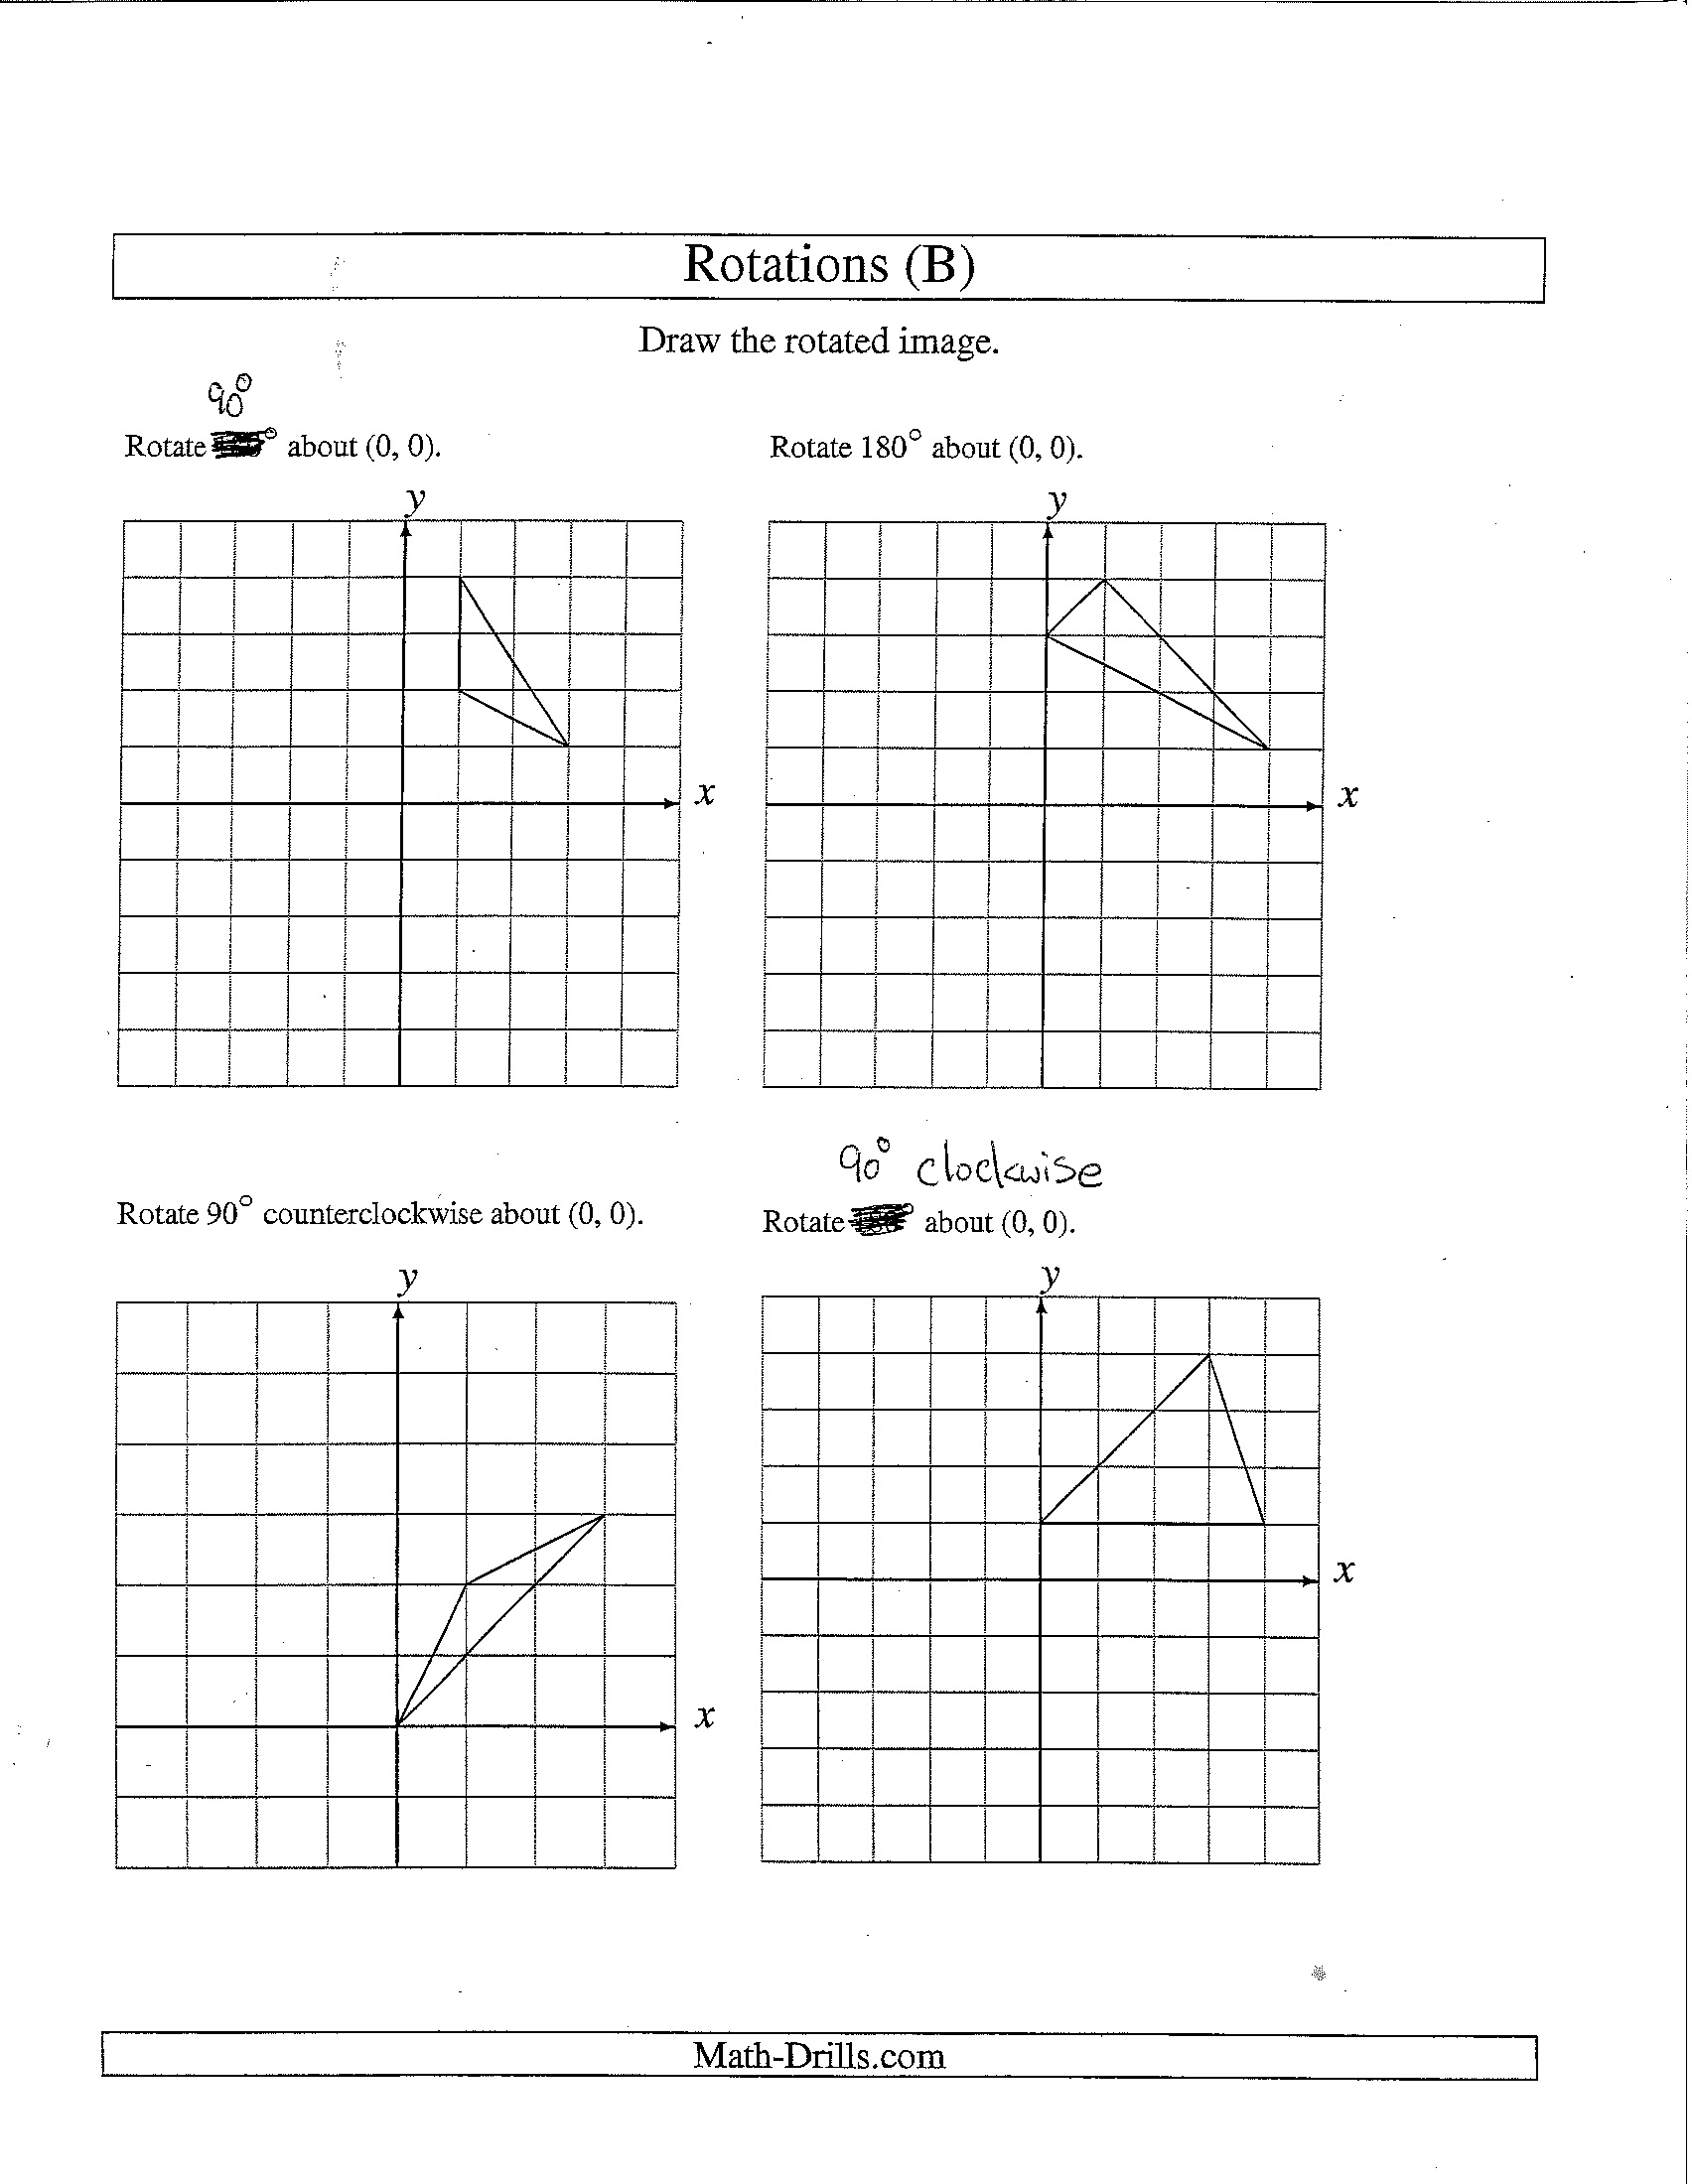 11 Best Images of Earth Rotation Worksheet 4th Grade - Earth Rotation